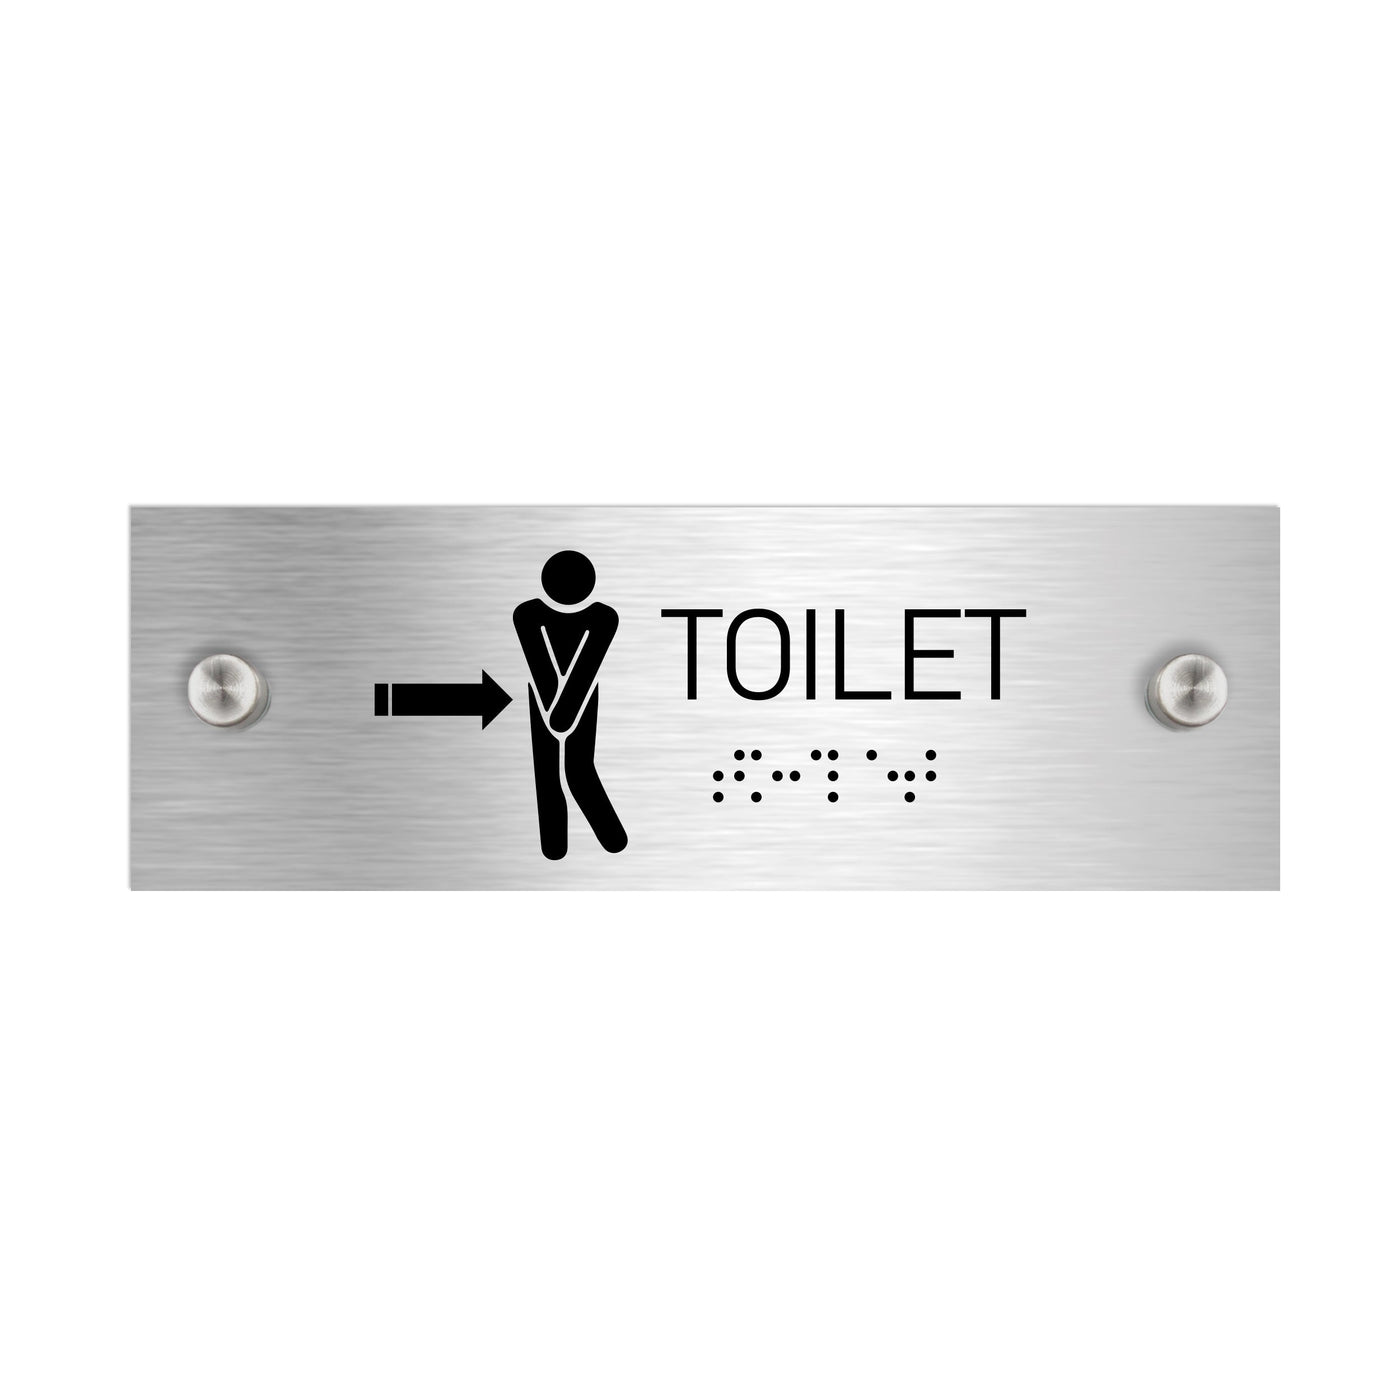 Bathroom Signs - Men Toilet Signs With Braille - Stainless Steel